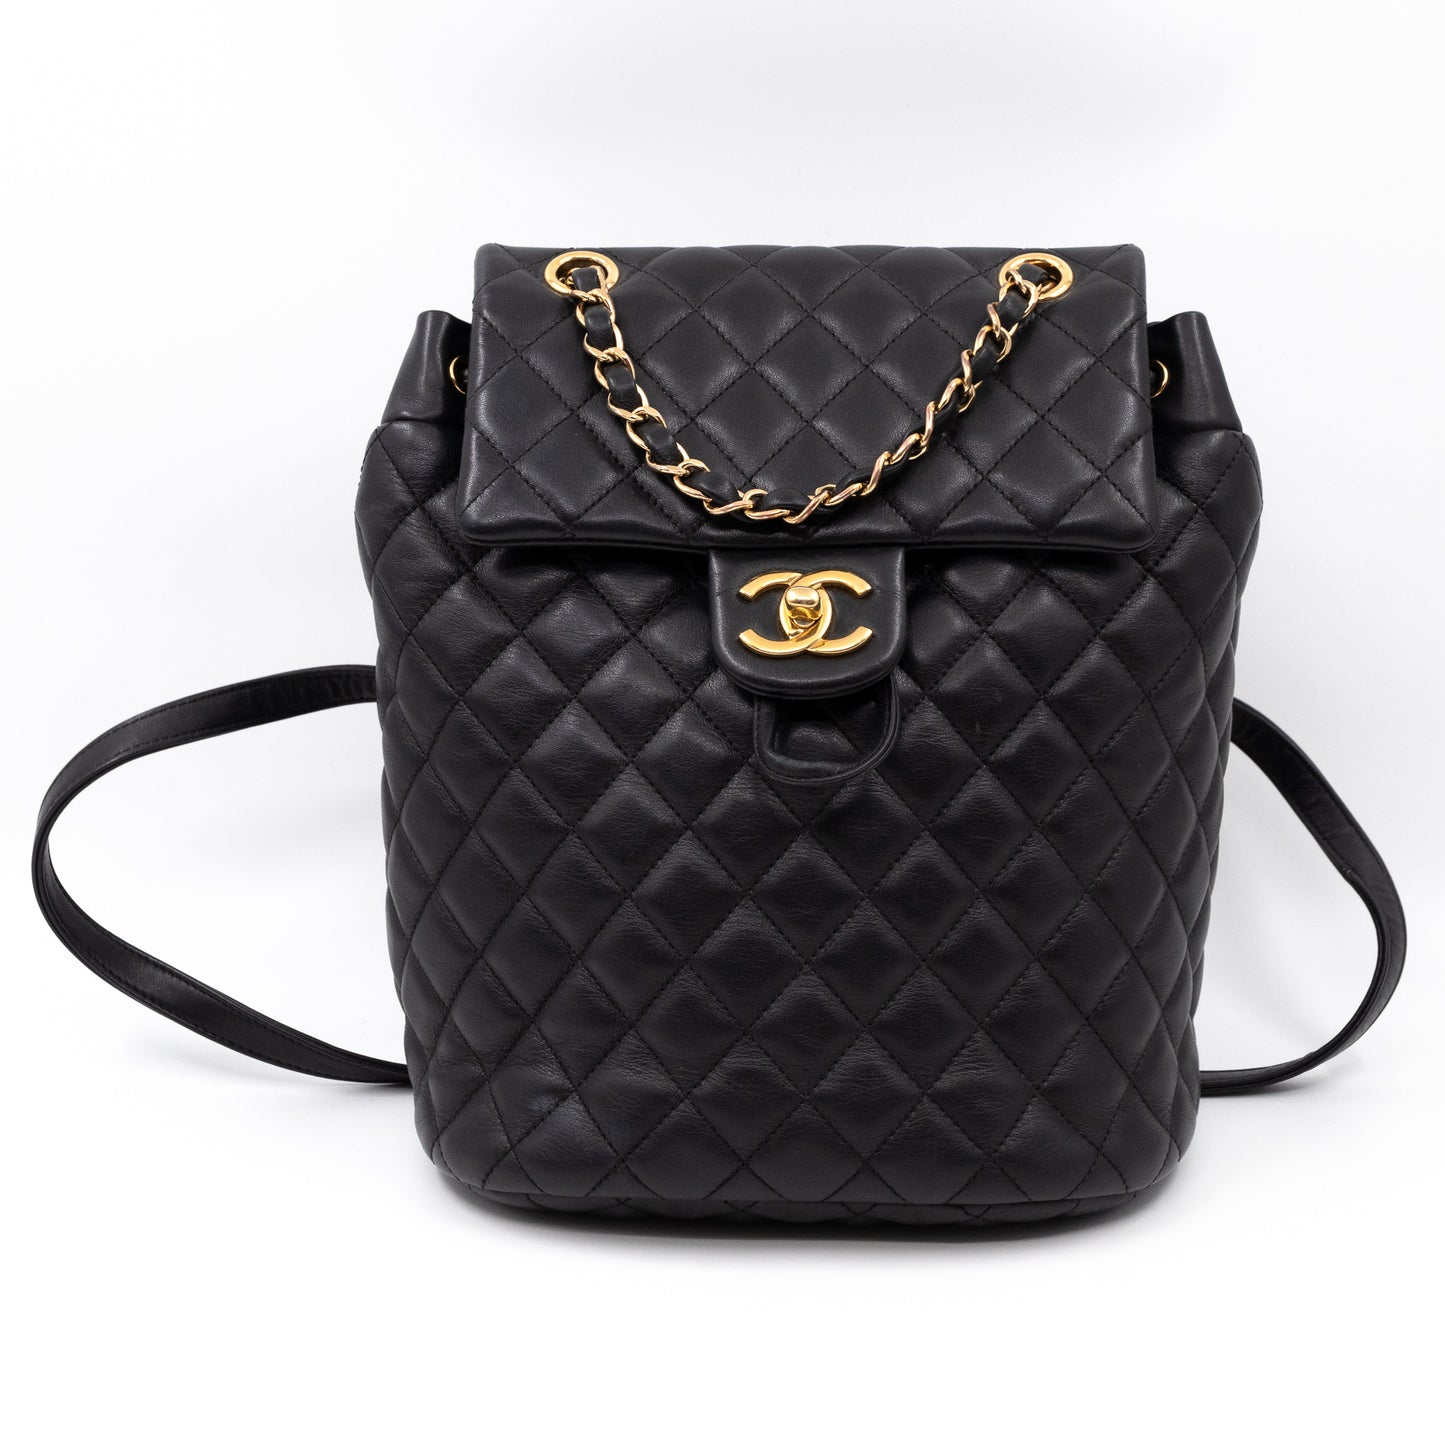 Urban Spirit Backpack Black Quilted Leather